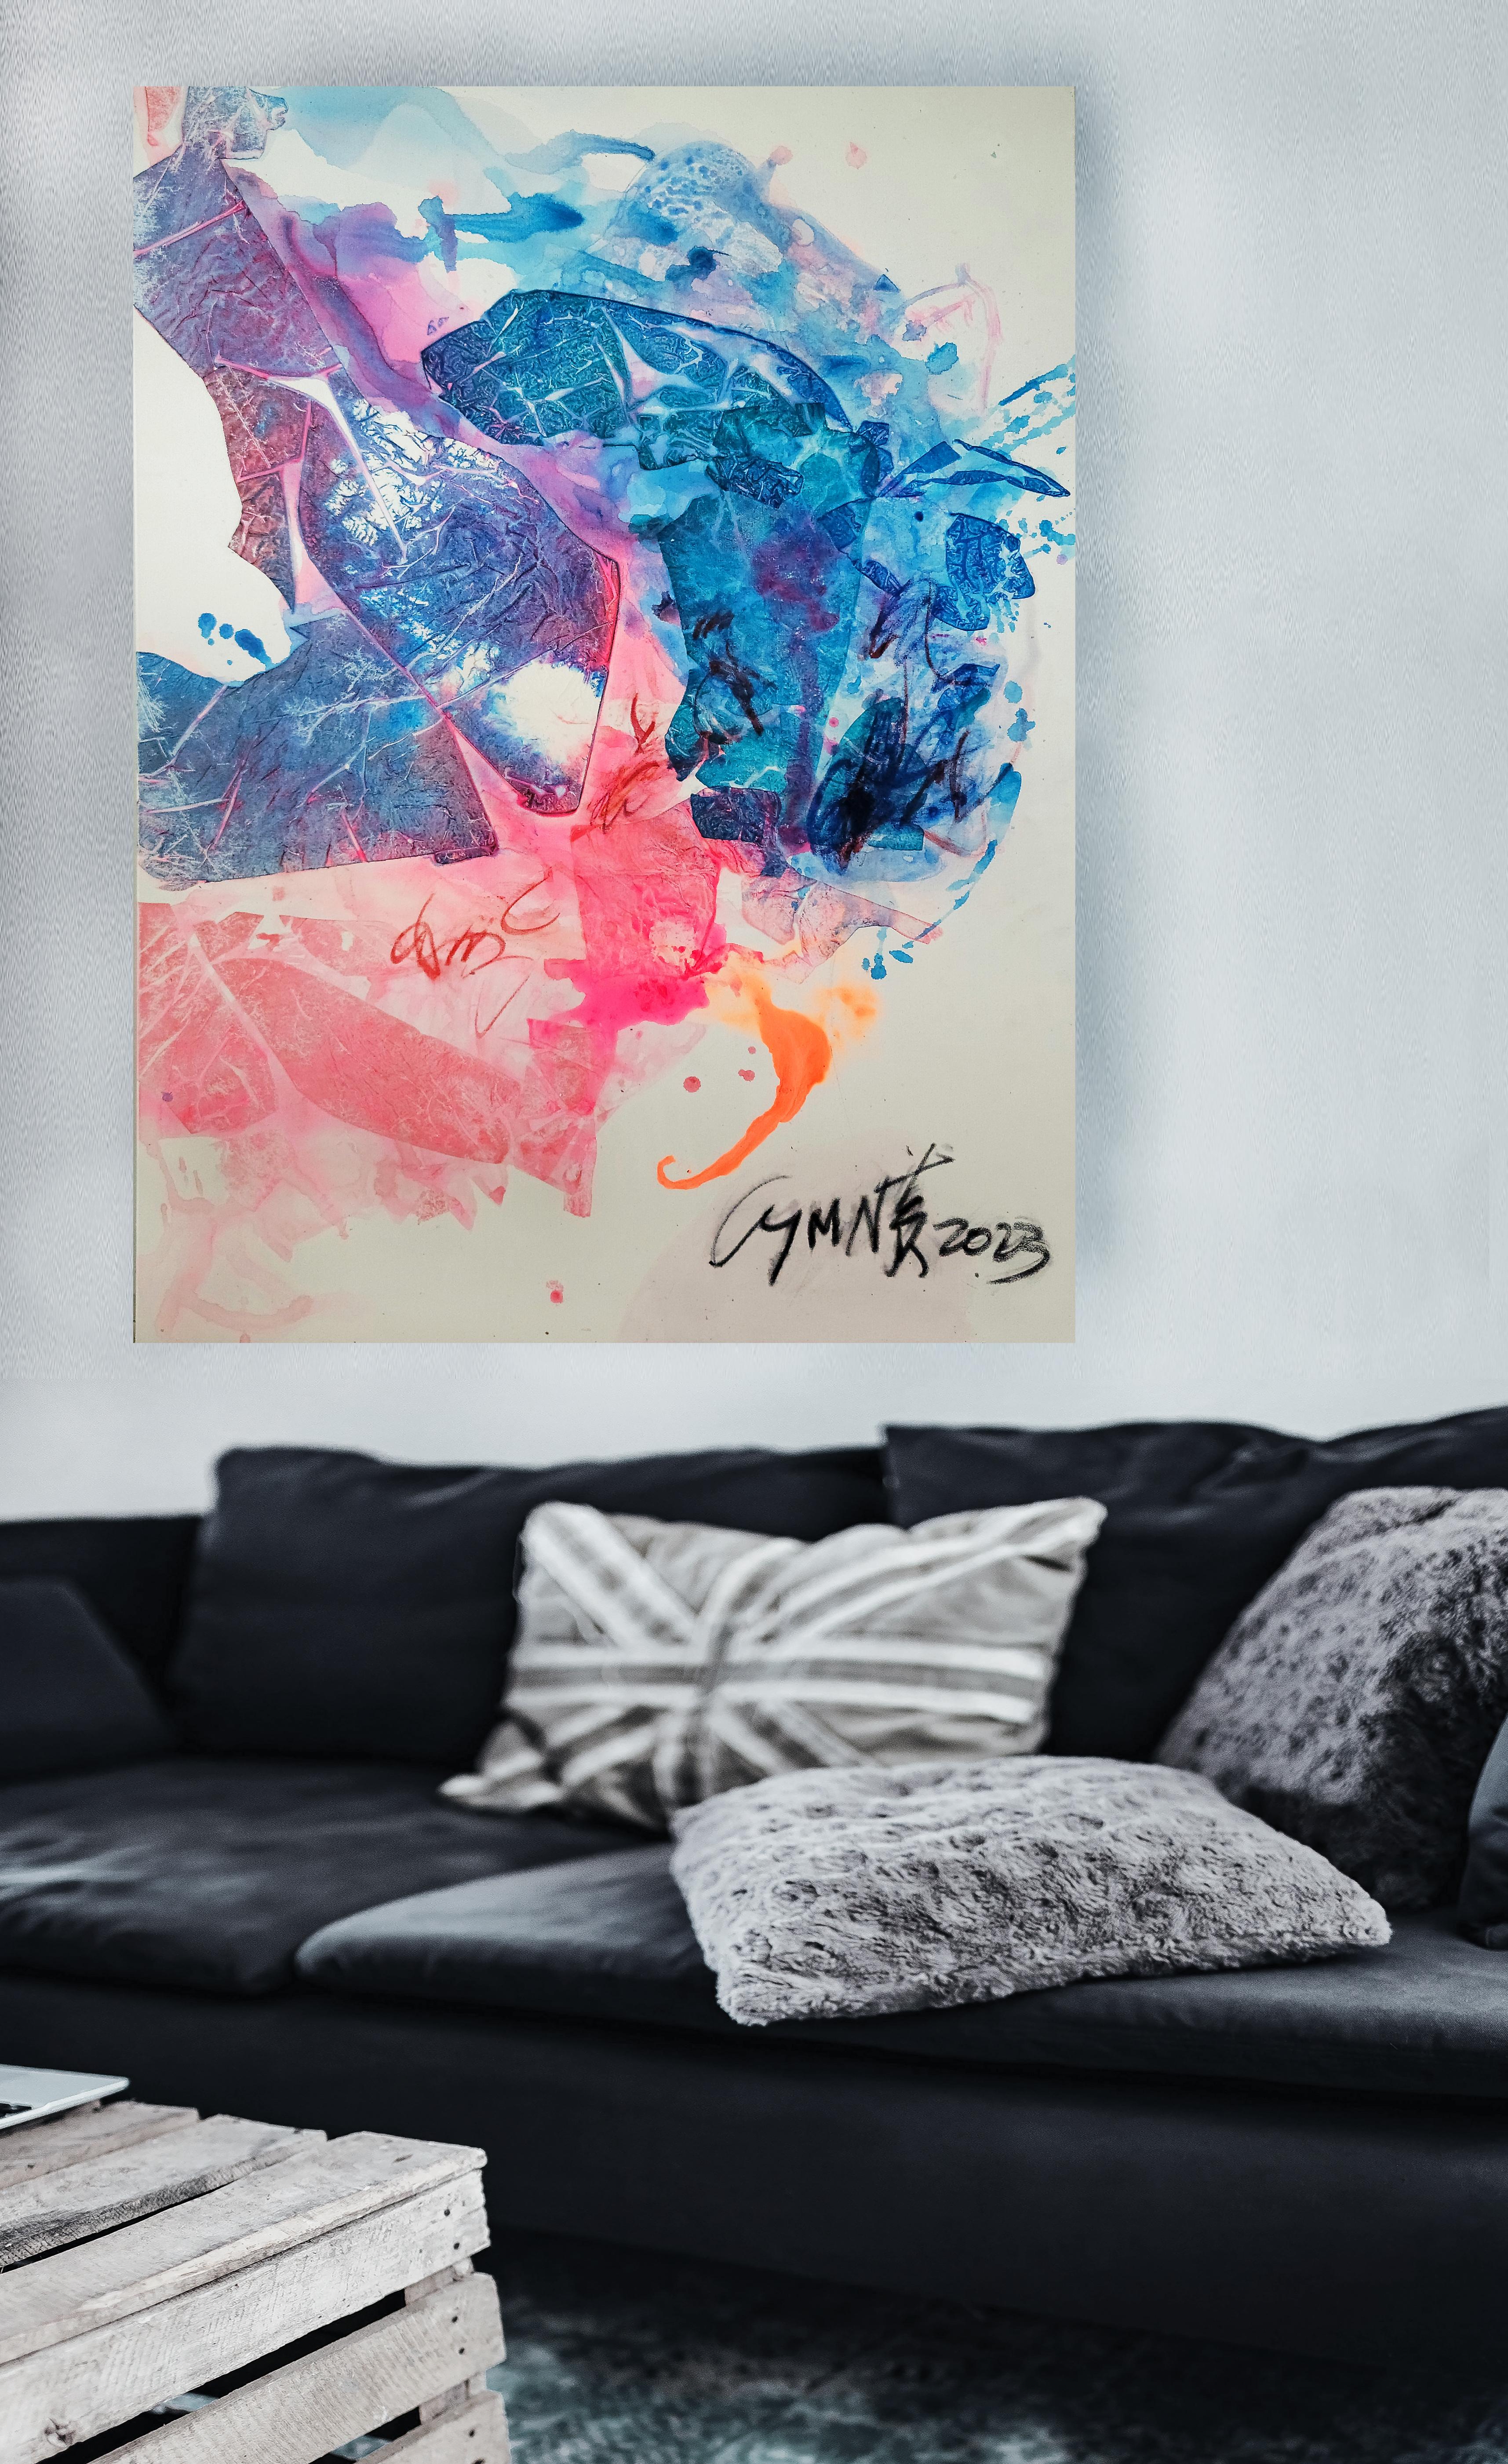 Resilient Resurgence-Fresh, colorful, Expressive Abstract, Zen Calligraphy - Abstract Expressionist Painting by Cymn Wong 